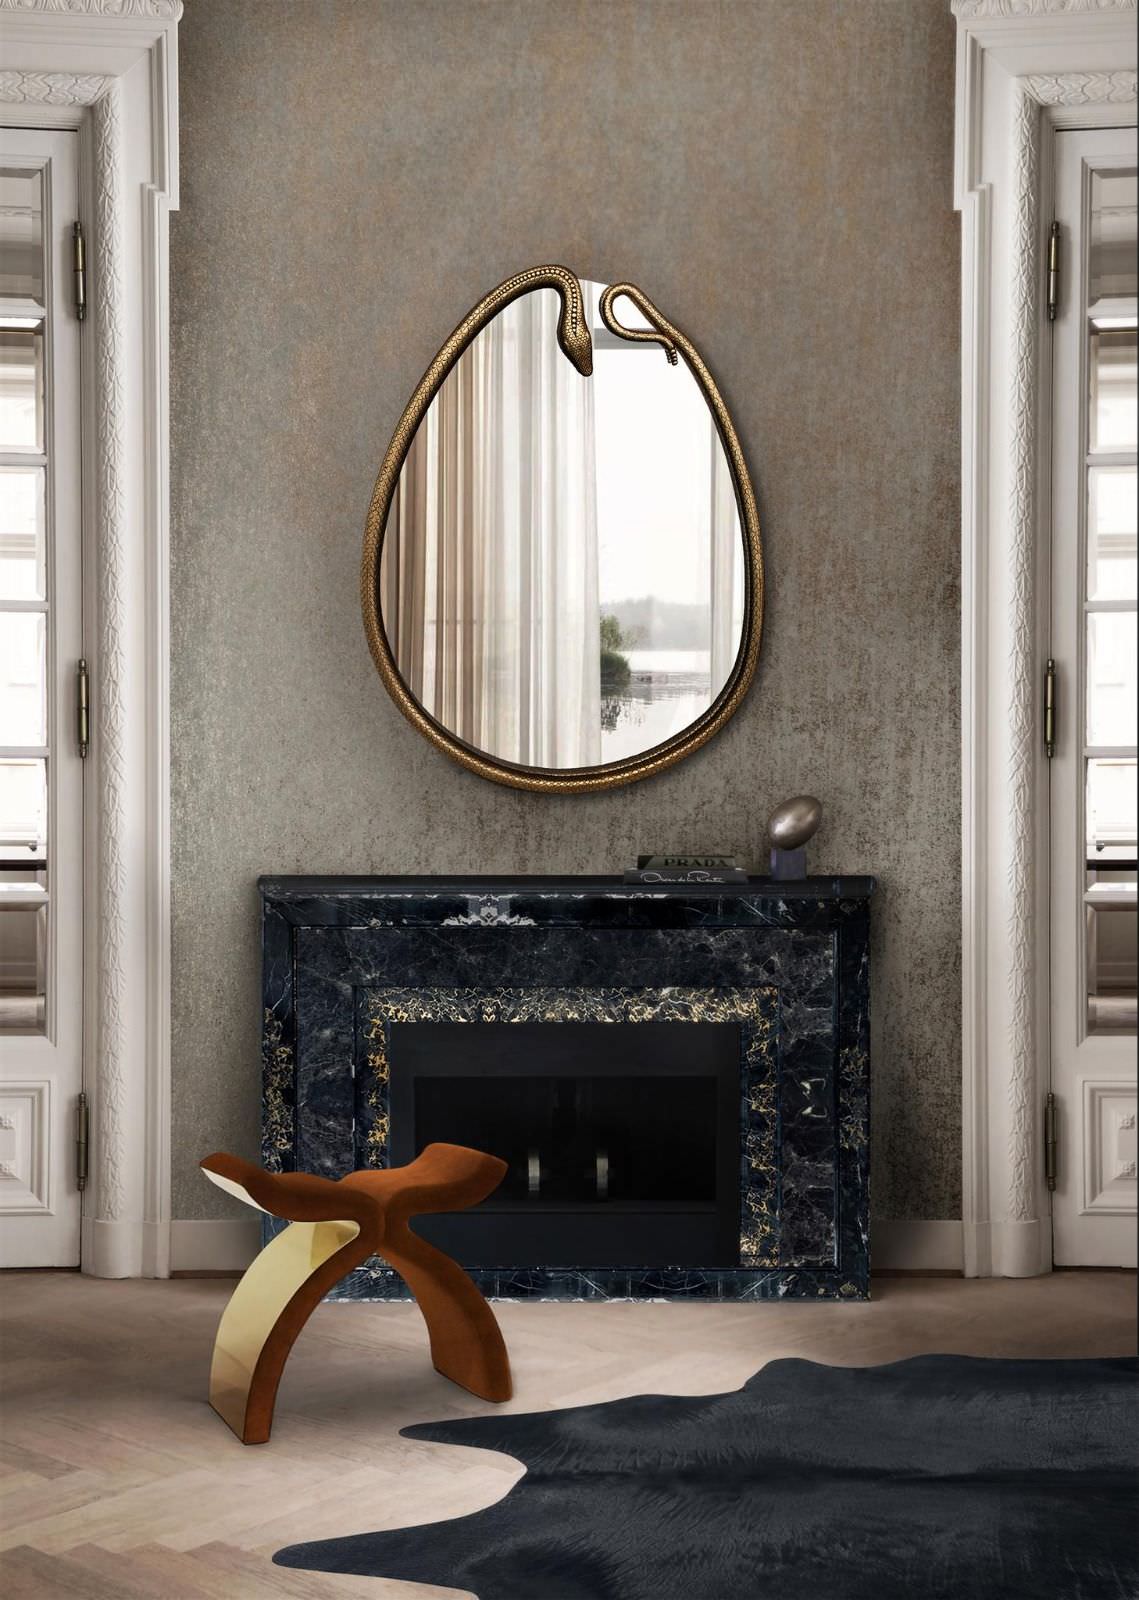 Framed in a coiled polished brass serpent form with a black jewel eye this mirror is the perfect way to add a touch of exoticism to any interior setting.